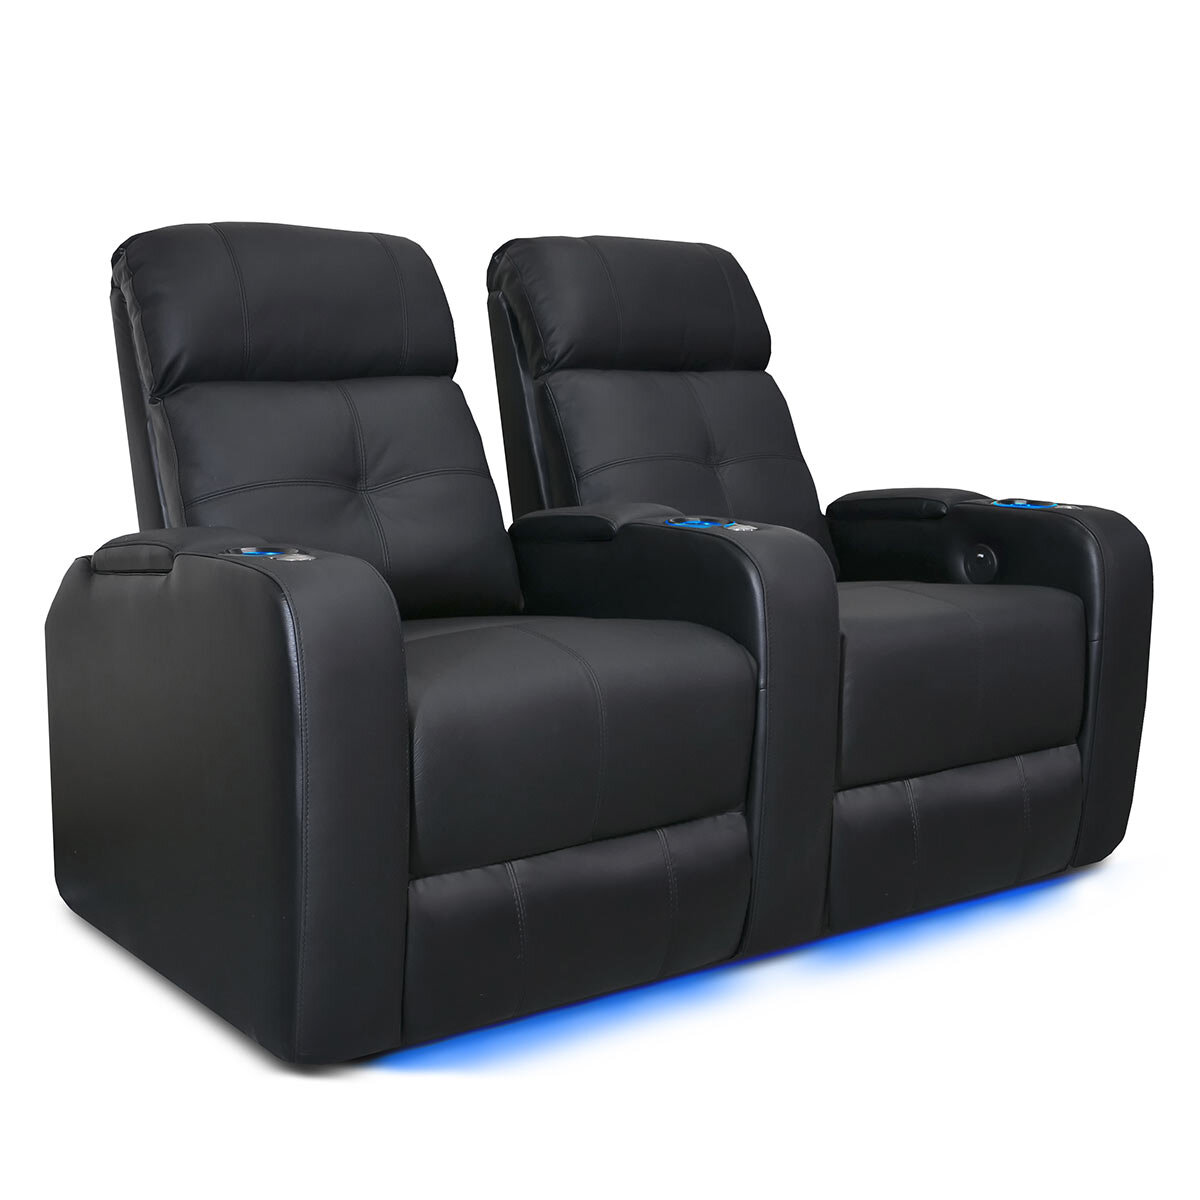 Valencia Home Theatre Seating Verona Row of 2 Chairs, Black